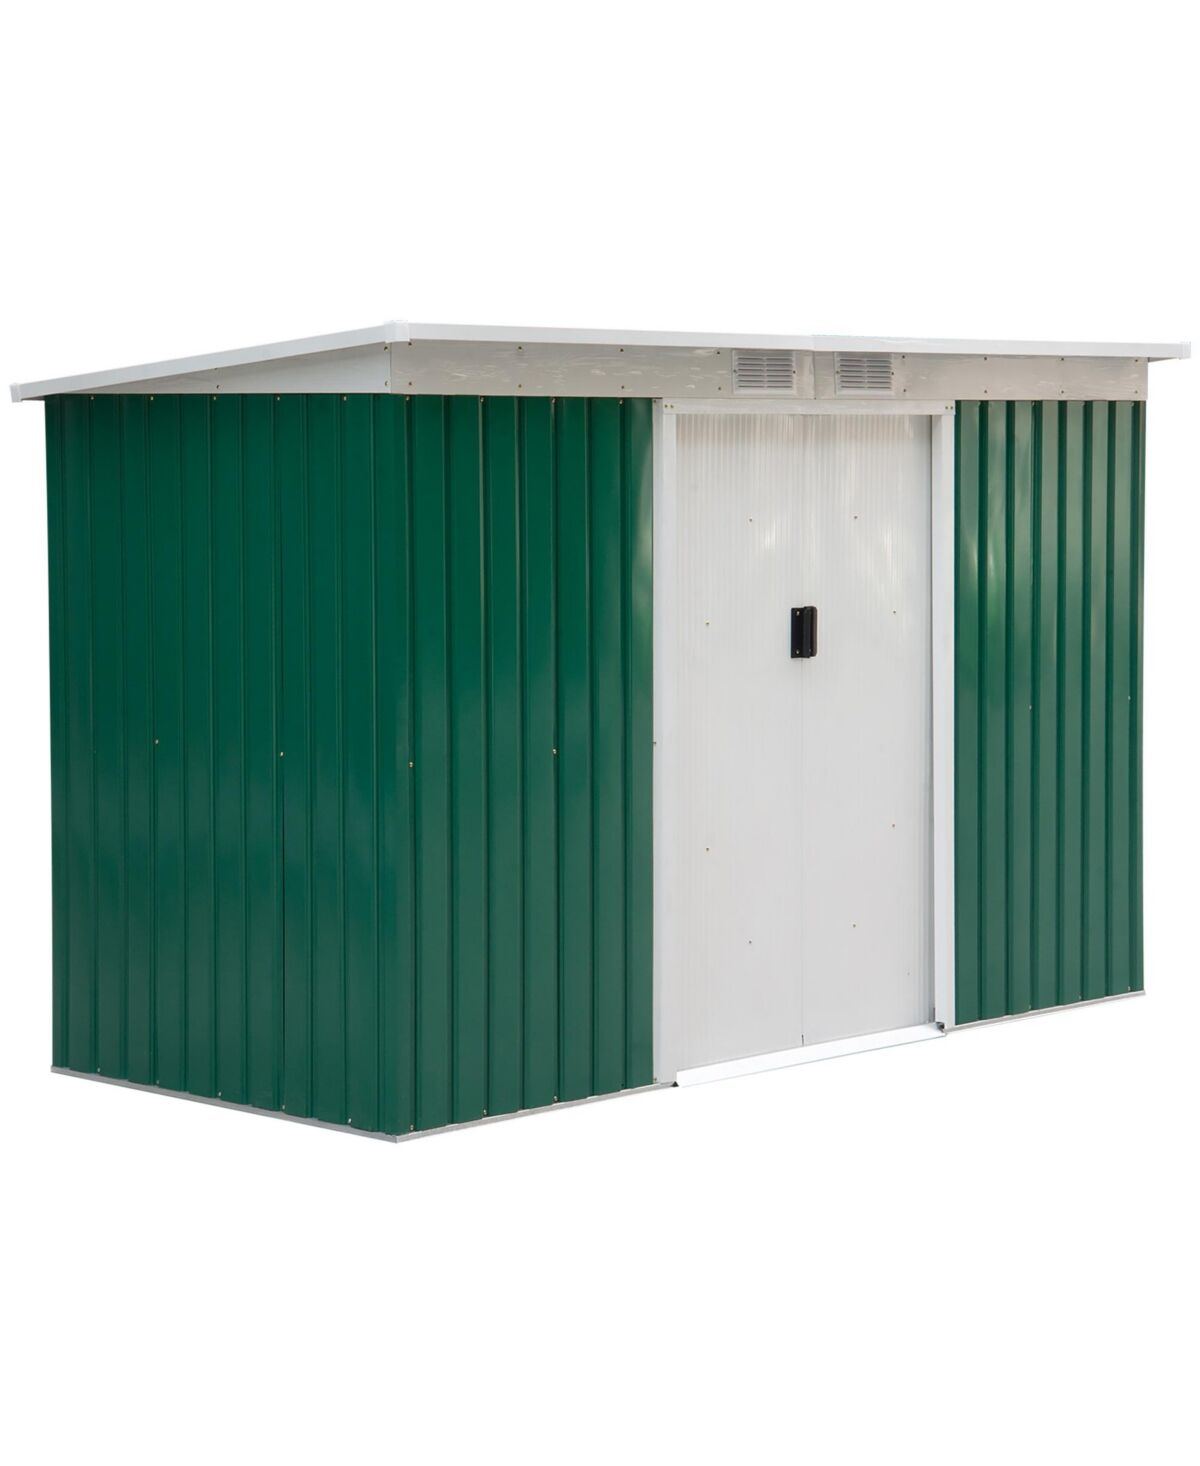 Outsunny 9' x 4' Metal Garden Storage Shed Tool House with Sliding Door Spacious Layout & Durable Construction for Backyard, Patio, Lawn Green - Green